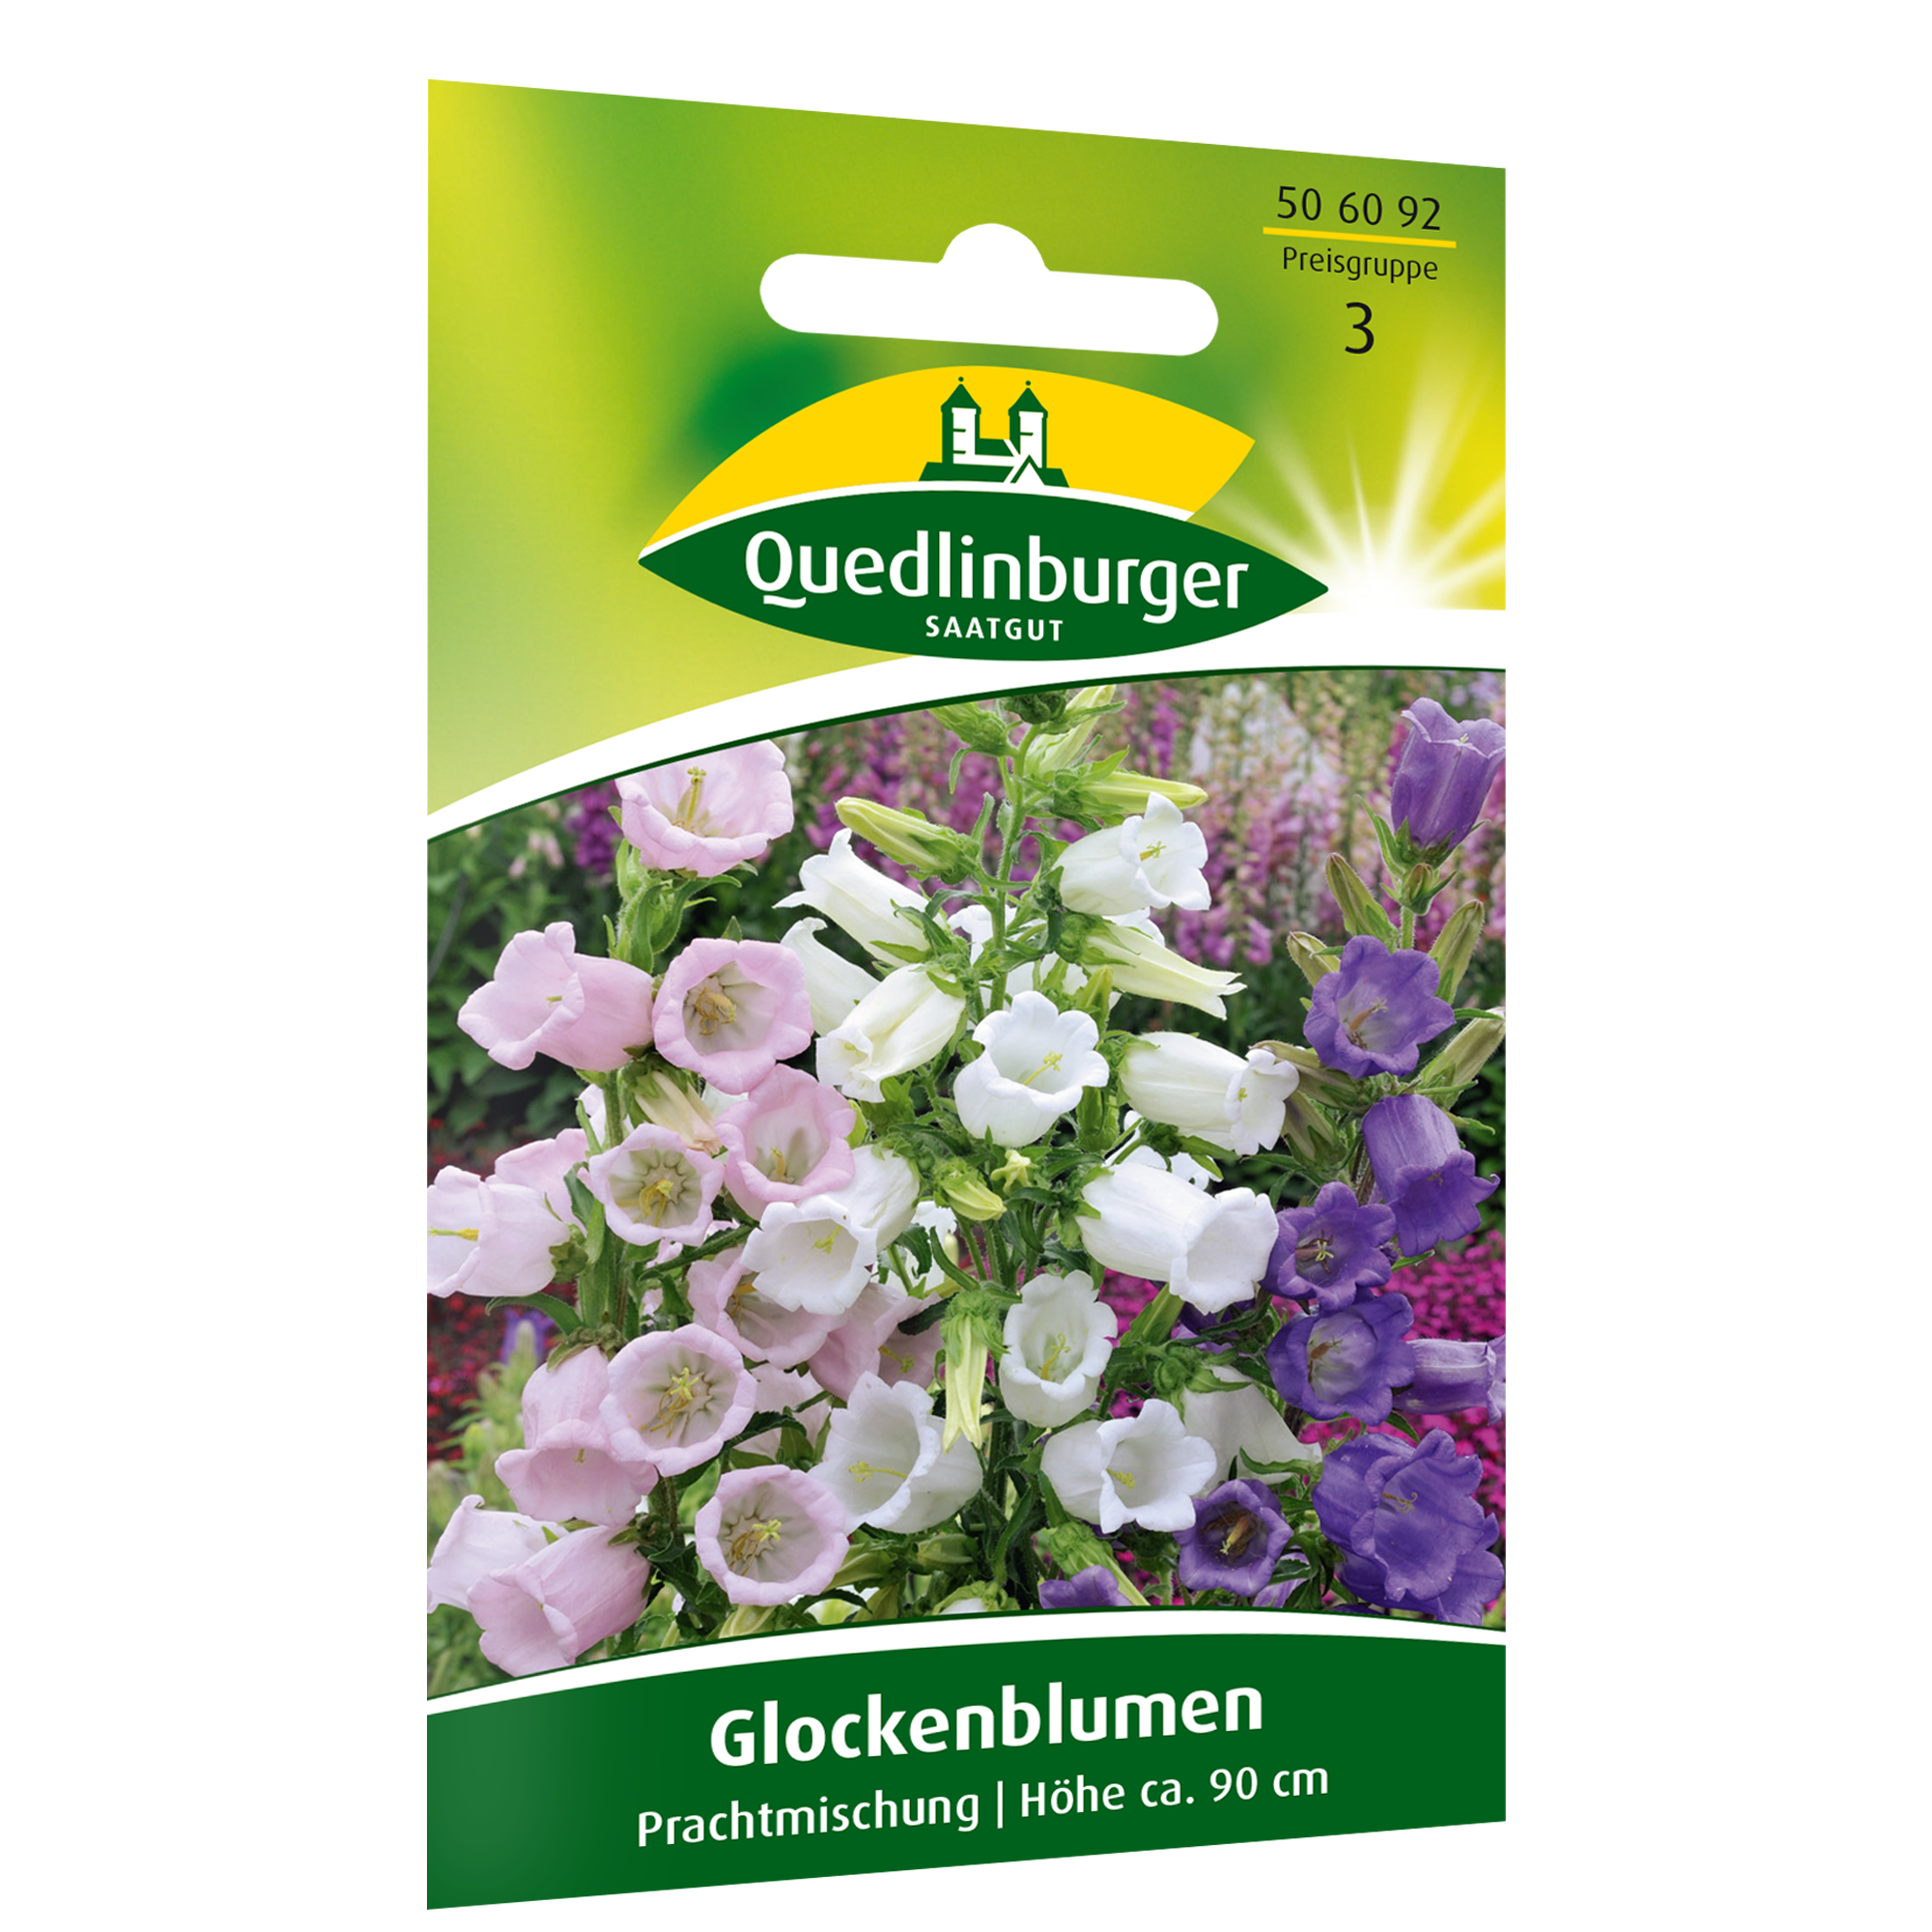 Glockenblume 'Prachtmischung' + product picture